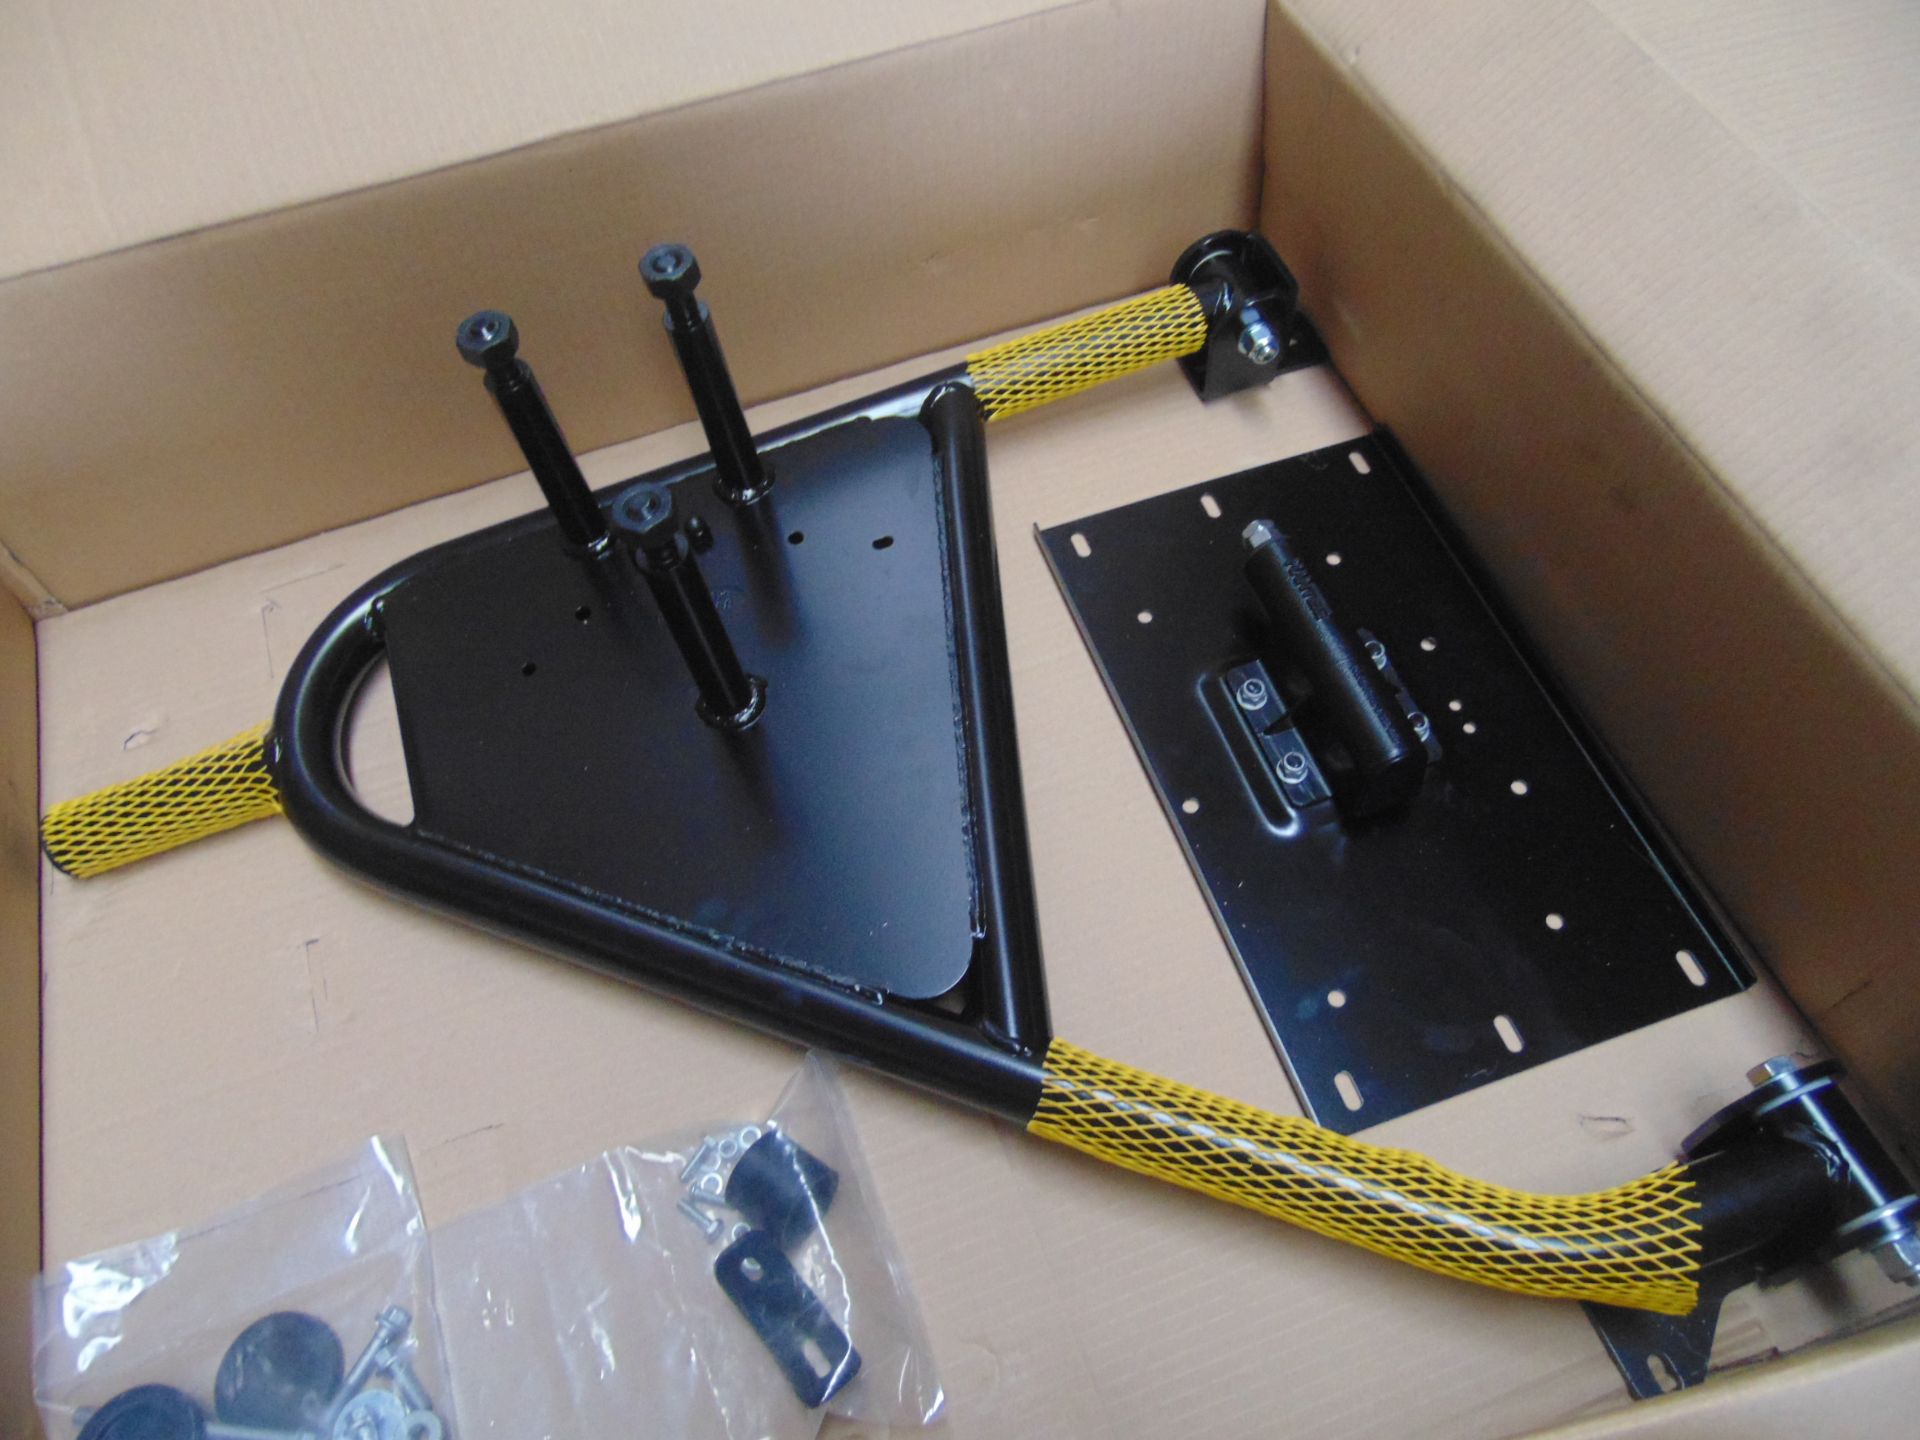 10 x Land Rover Defender Hard Top Swing Out Spare Wheel Carrier Kits P/No VPLDR0130 - Image 3 of 8